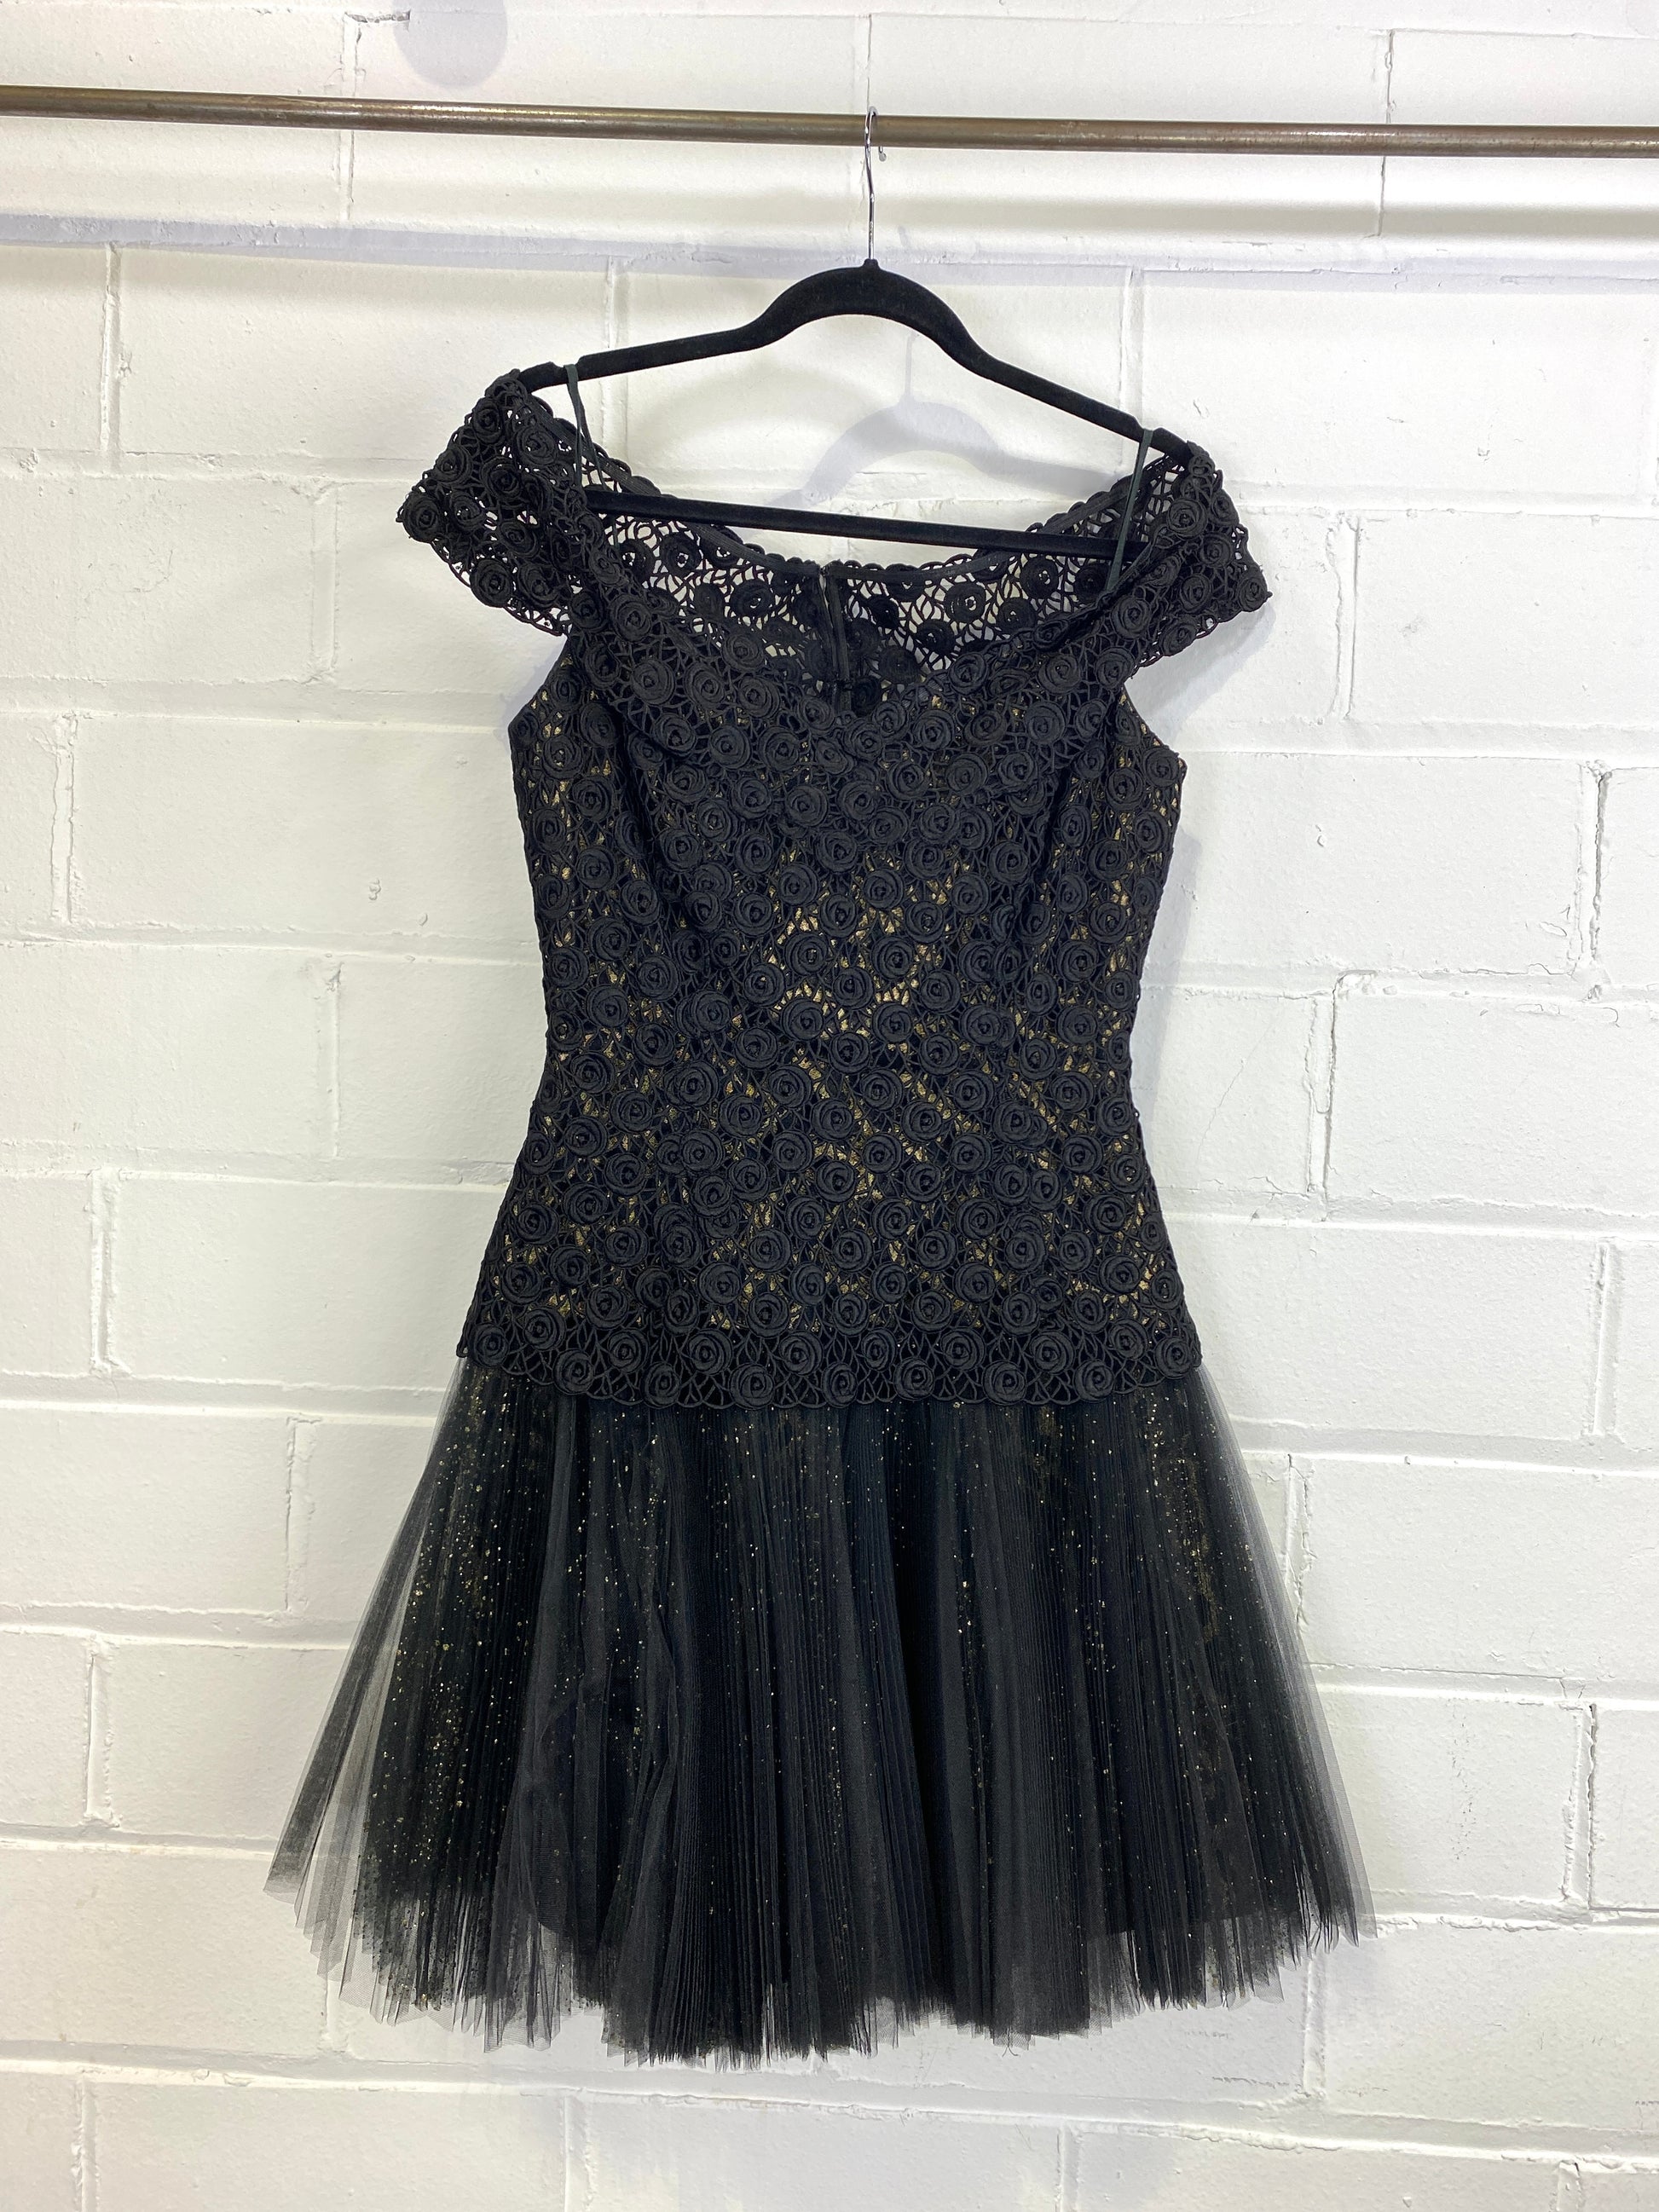 Vintage 1980s Black Pleated Tulle Drop-Waist Party Dress with Rose Lace Bodice